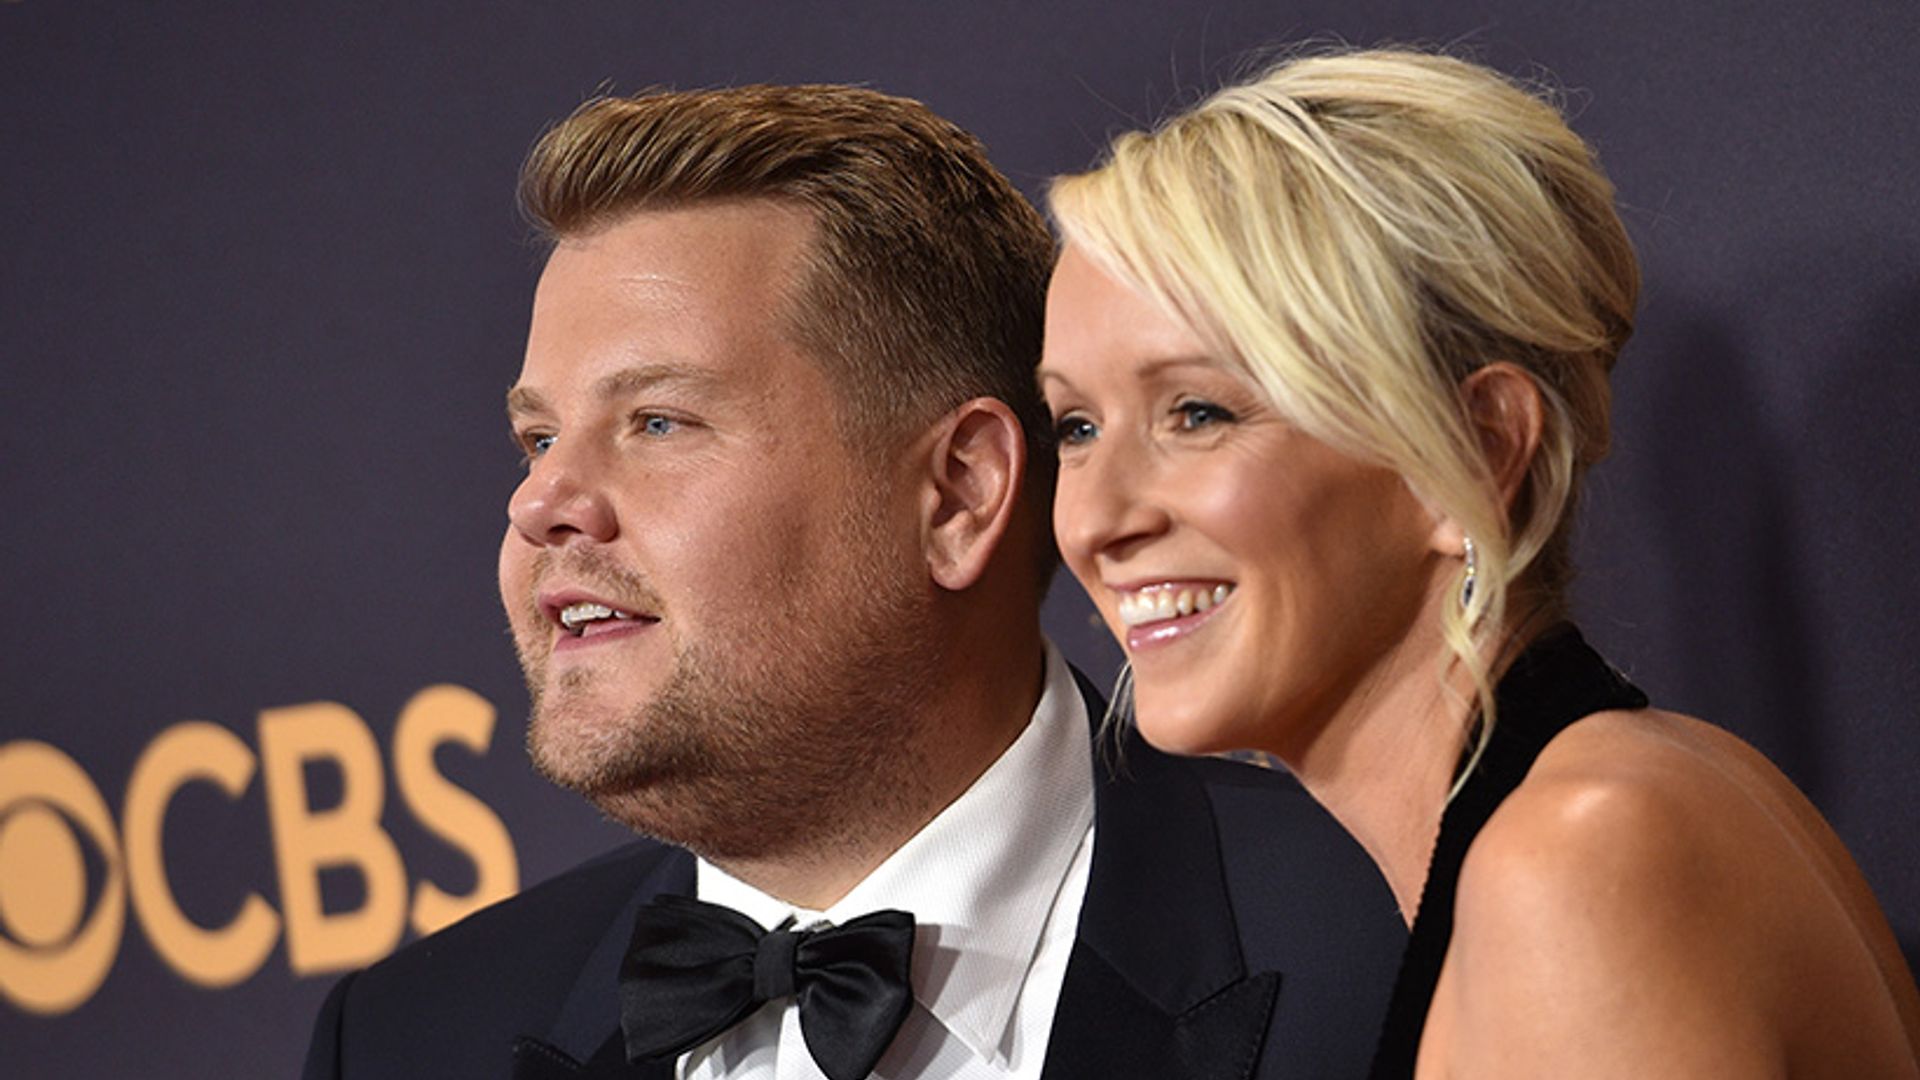 James Corden only has eyes for pregnant wife Julia Carey at 2017 Emmys